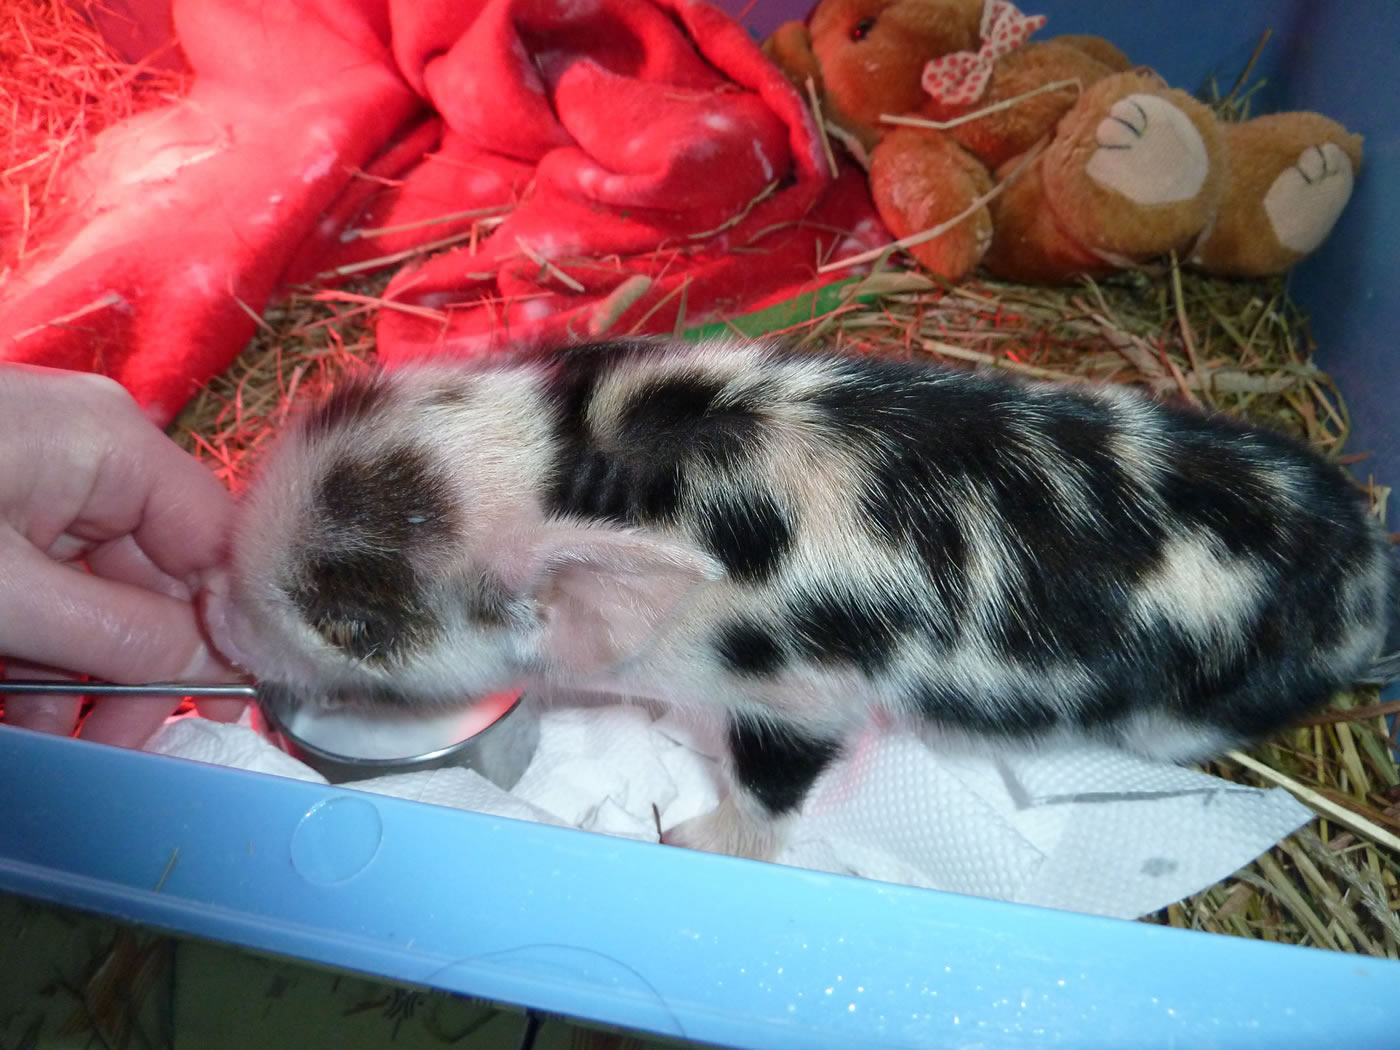 Picture of Geordie as a very young piglet being hand raised